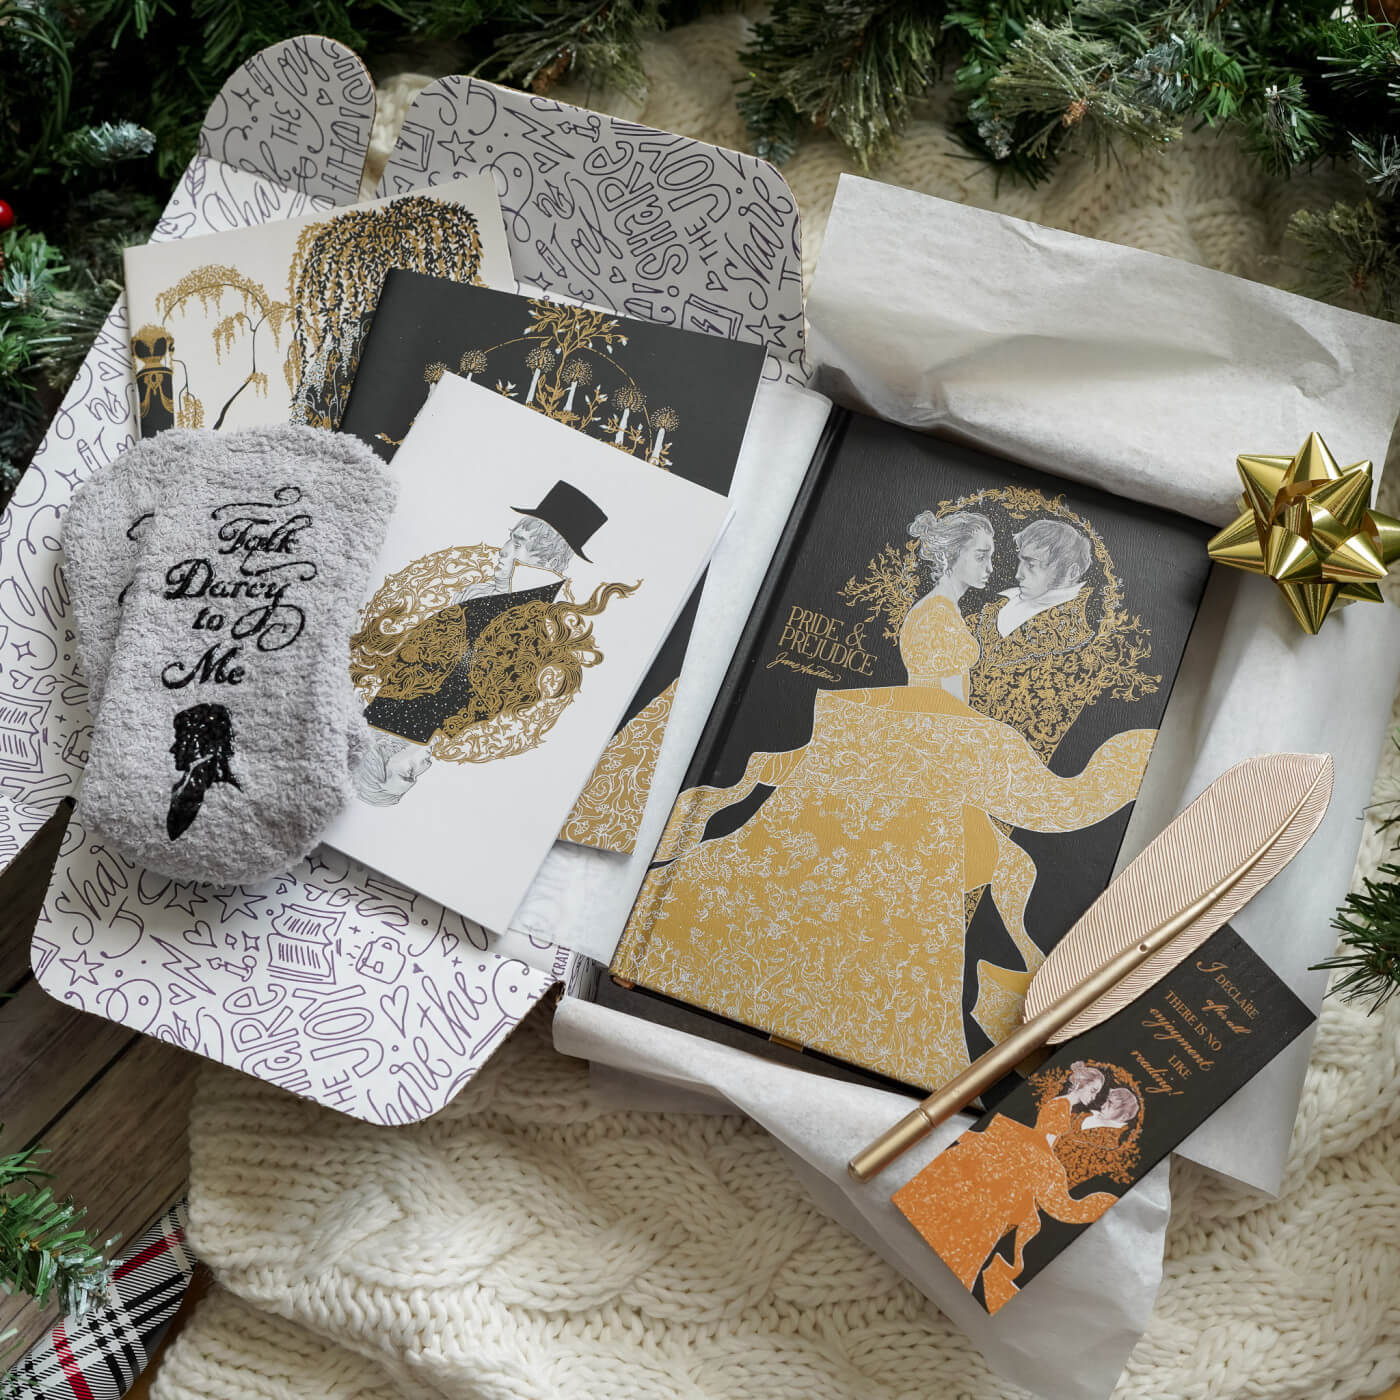 Pride and Prejudice gifts sold by LitJoy Crate